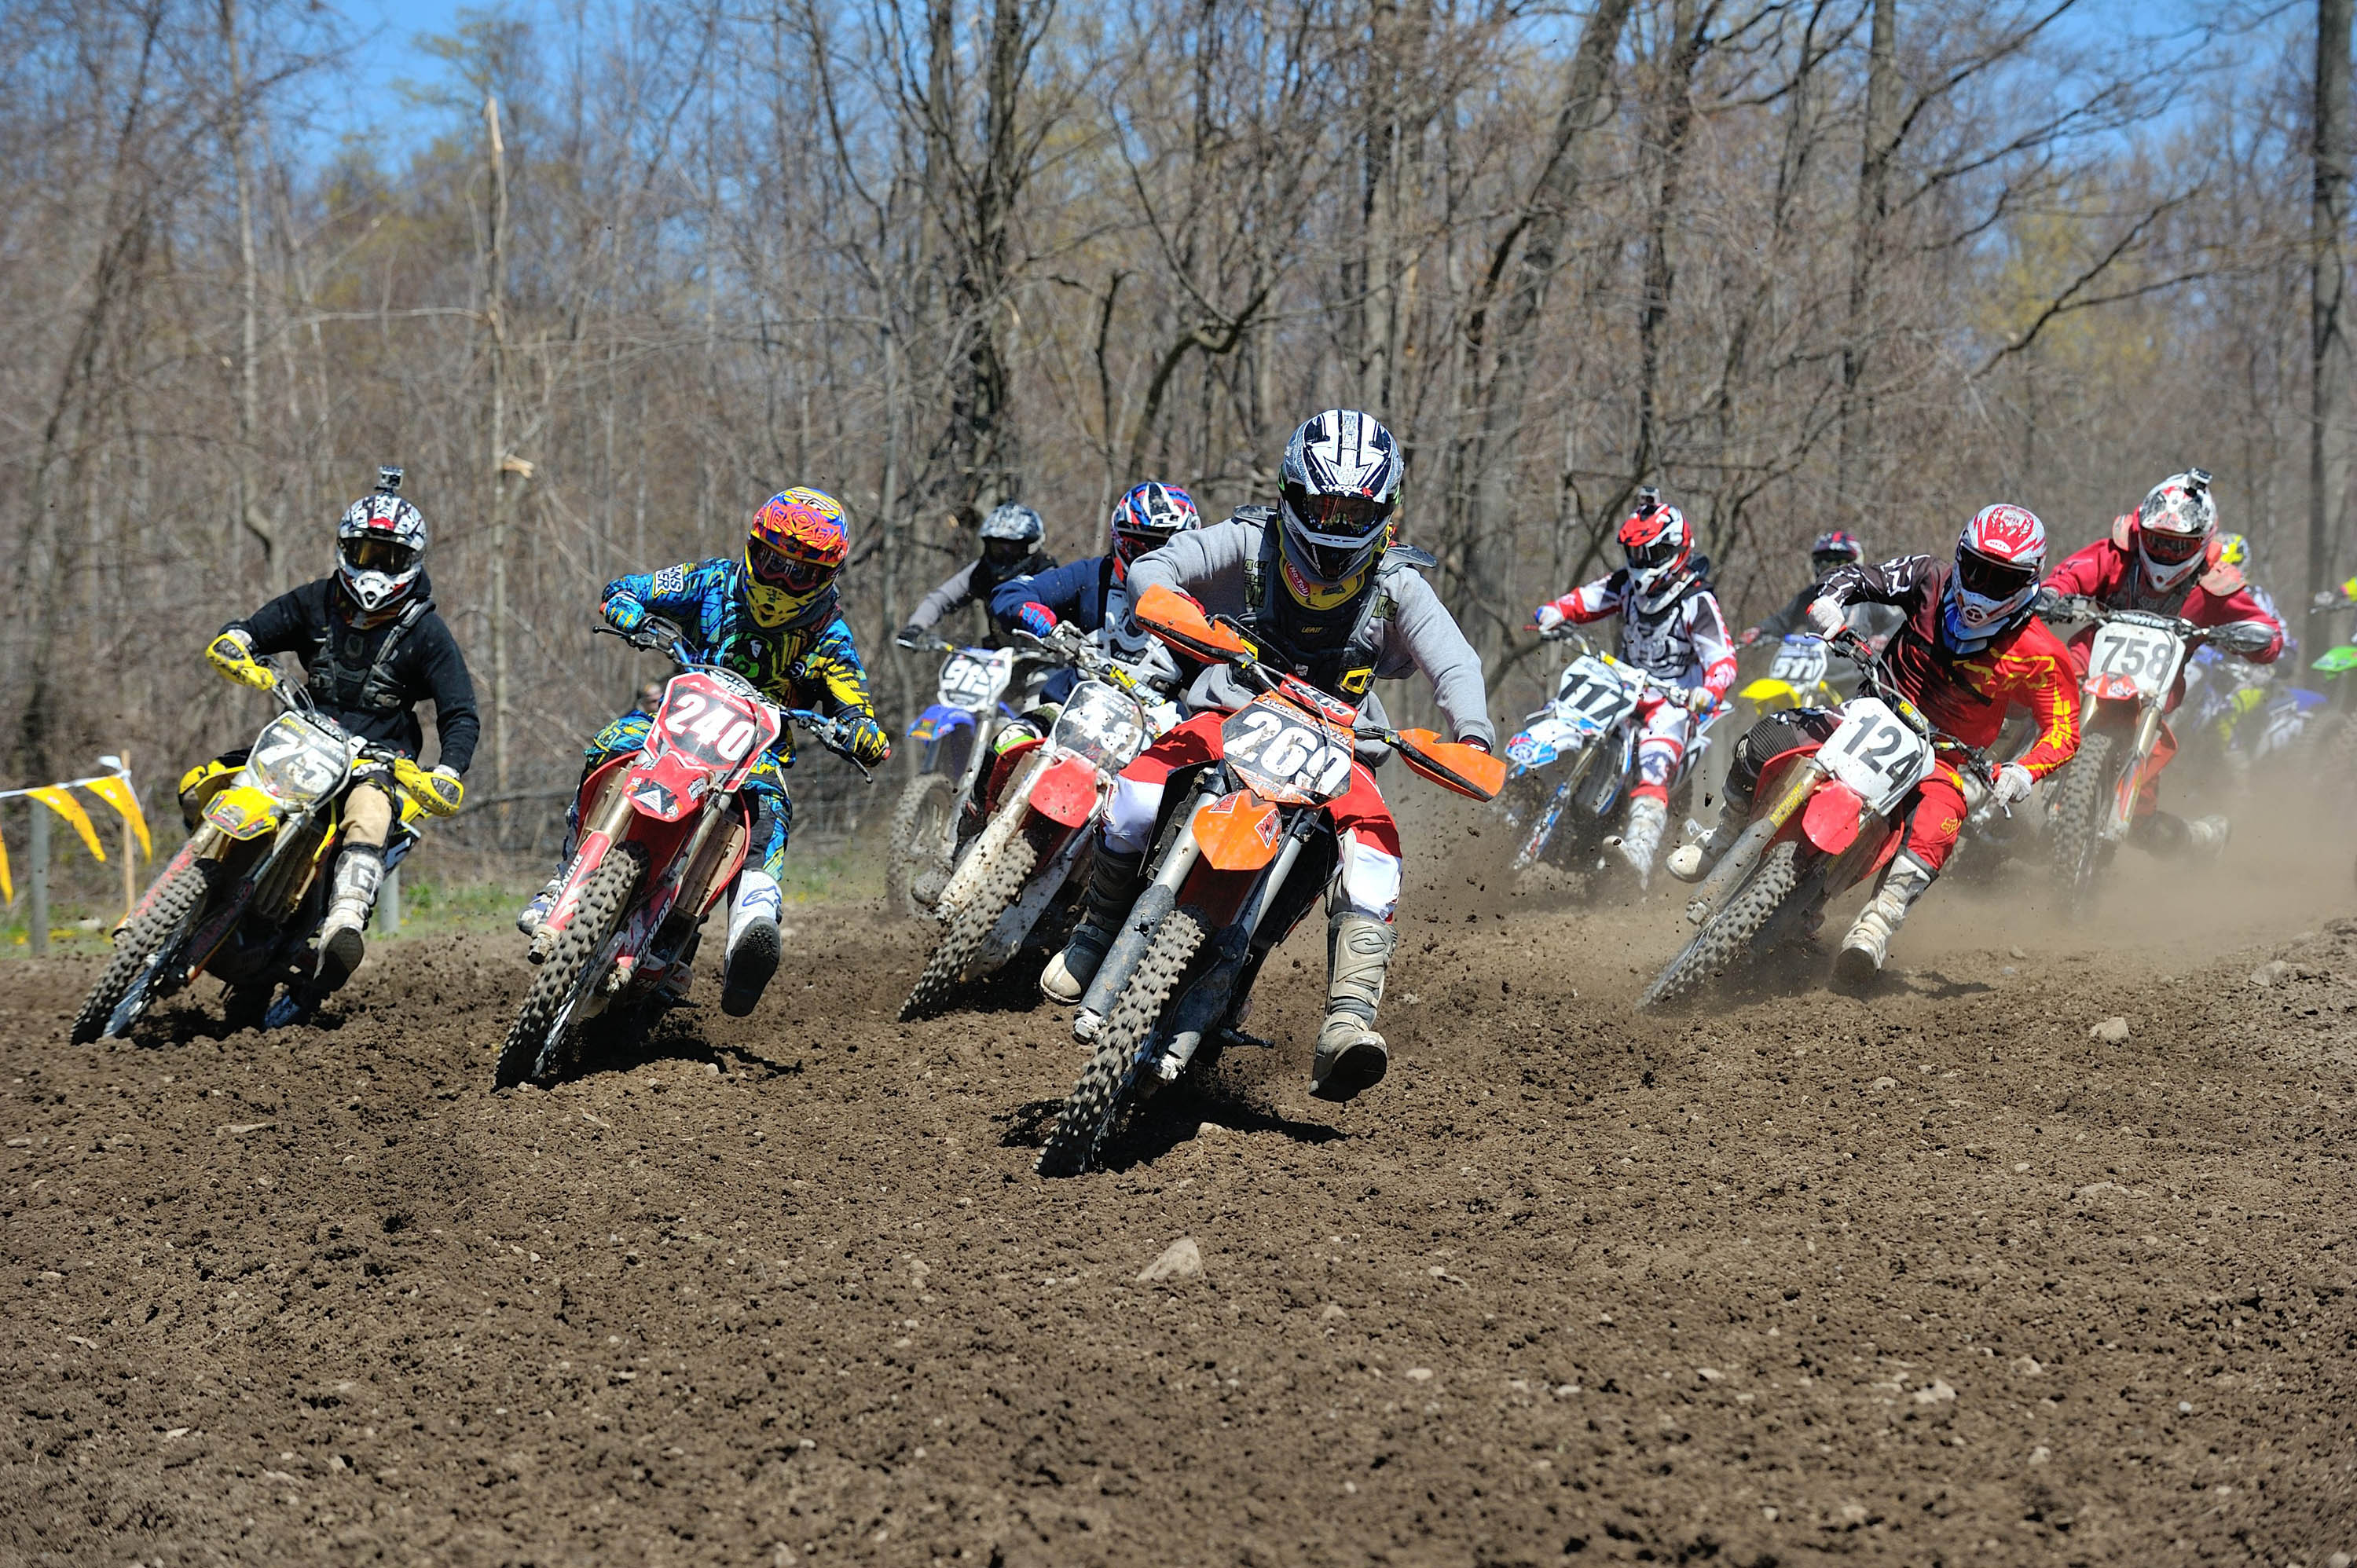 Senior Fall Classic MX Weekend September 22nd and 23rd